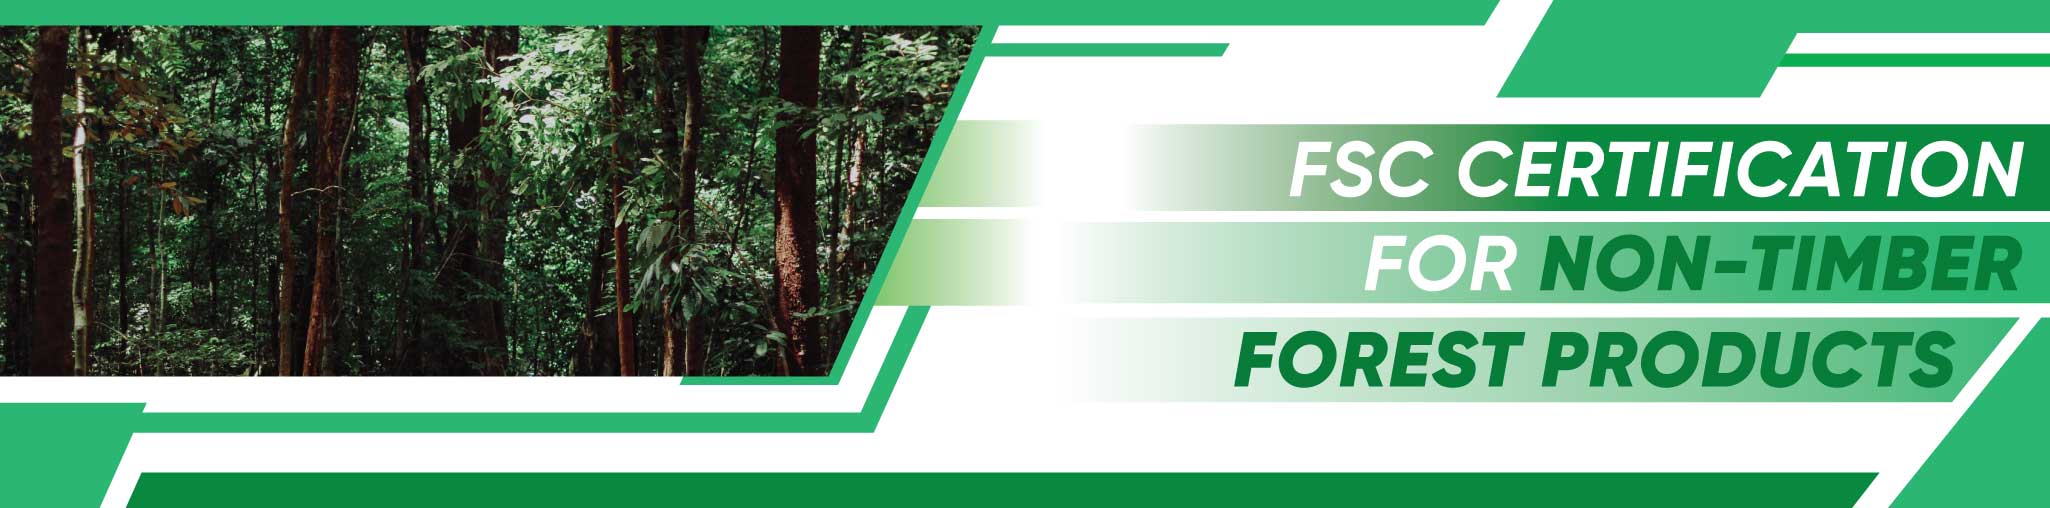 FSC Certification for Non-Timber Forest Products